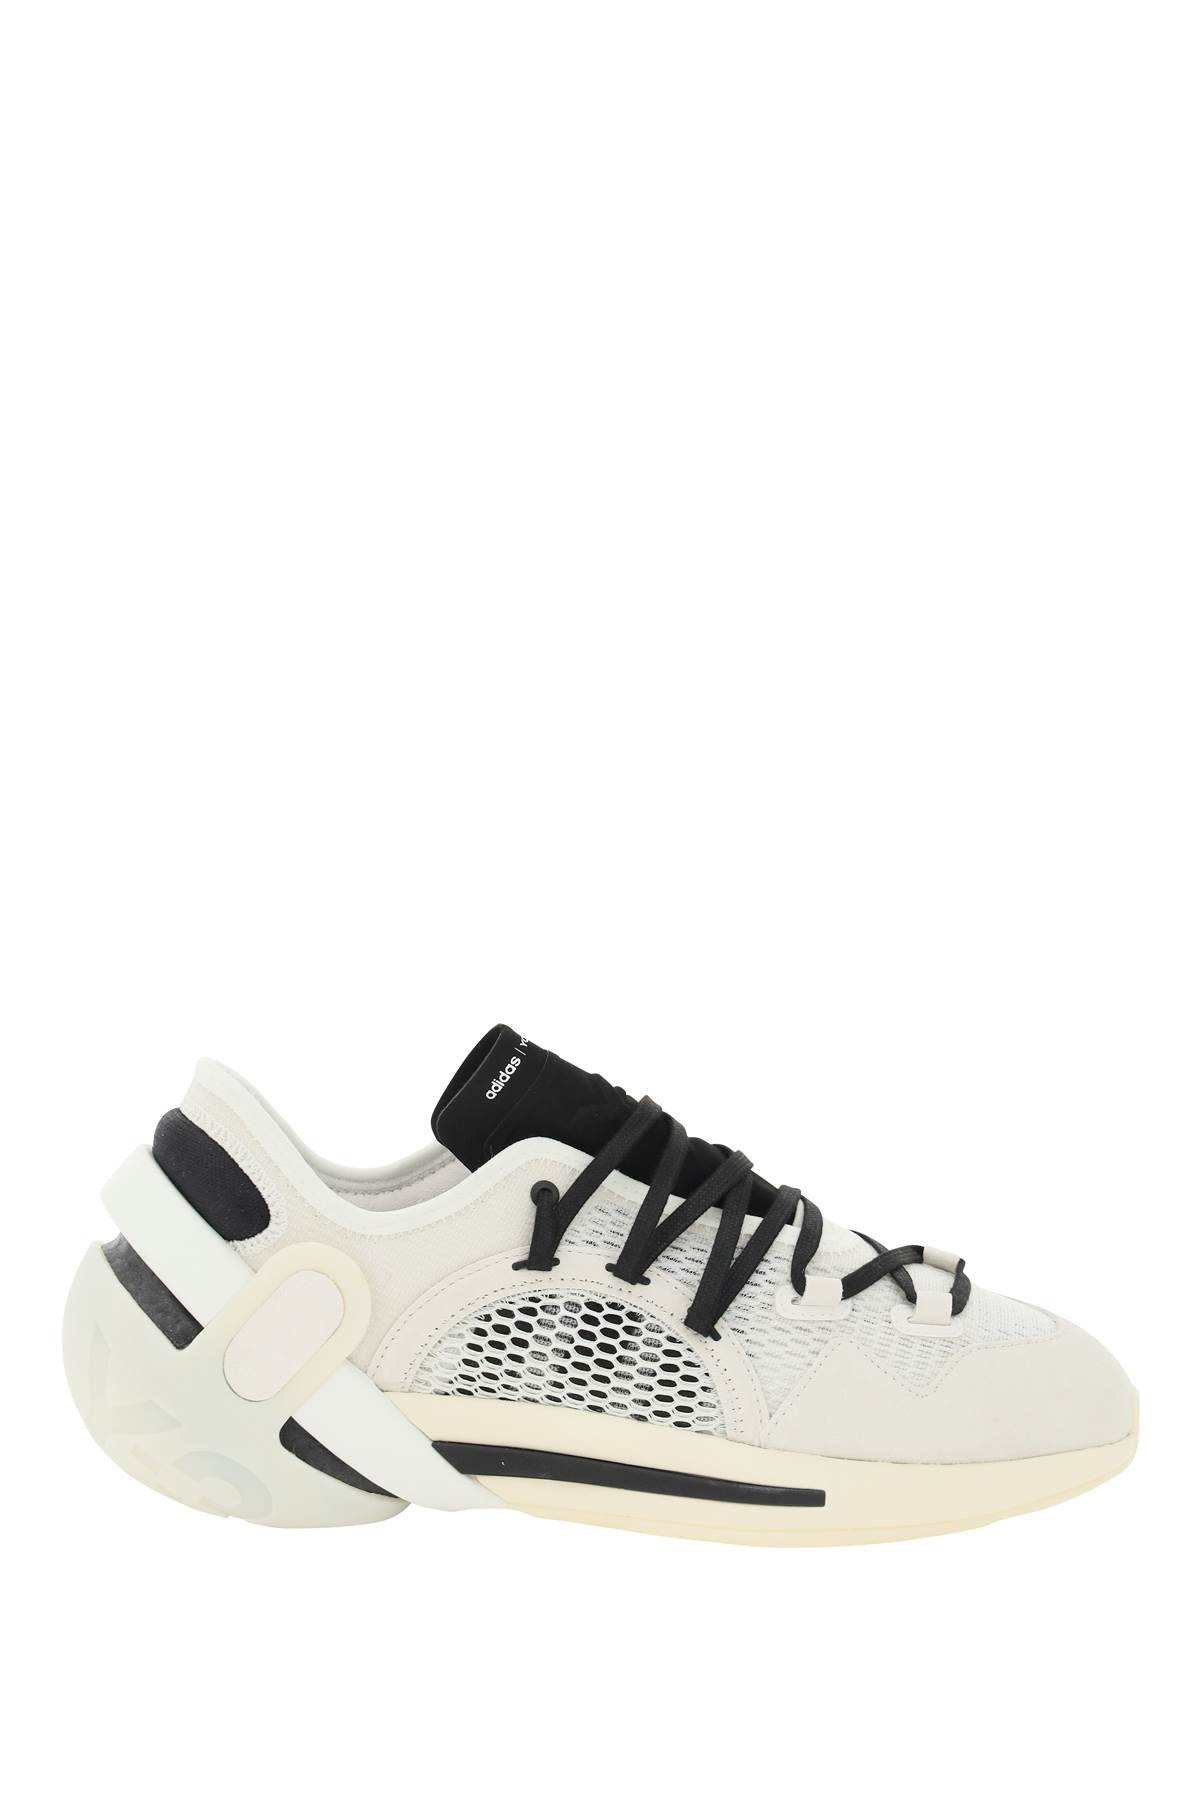 Y-3 Idoso Boost Sneakers